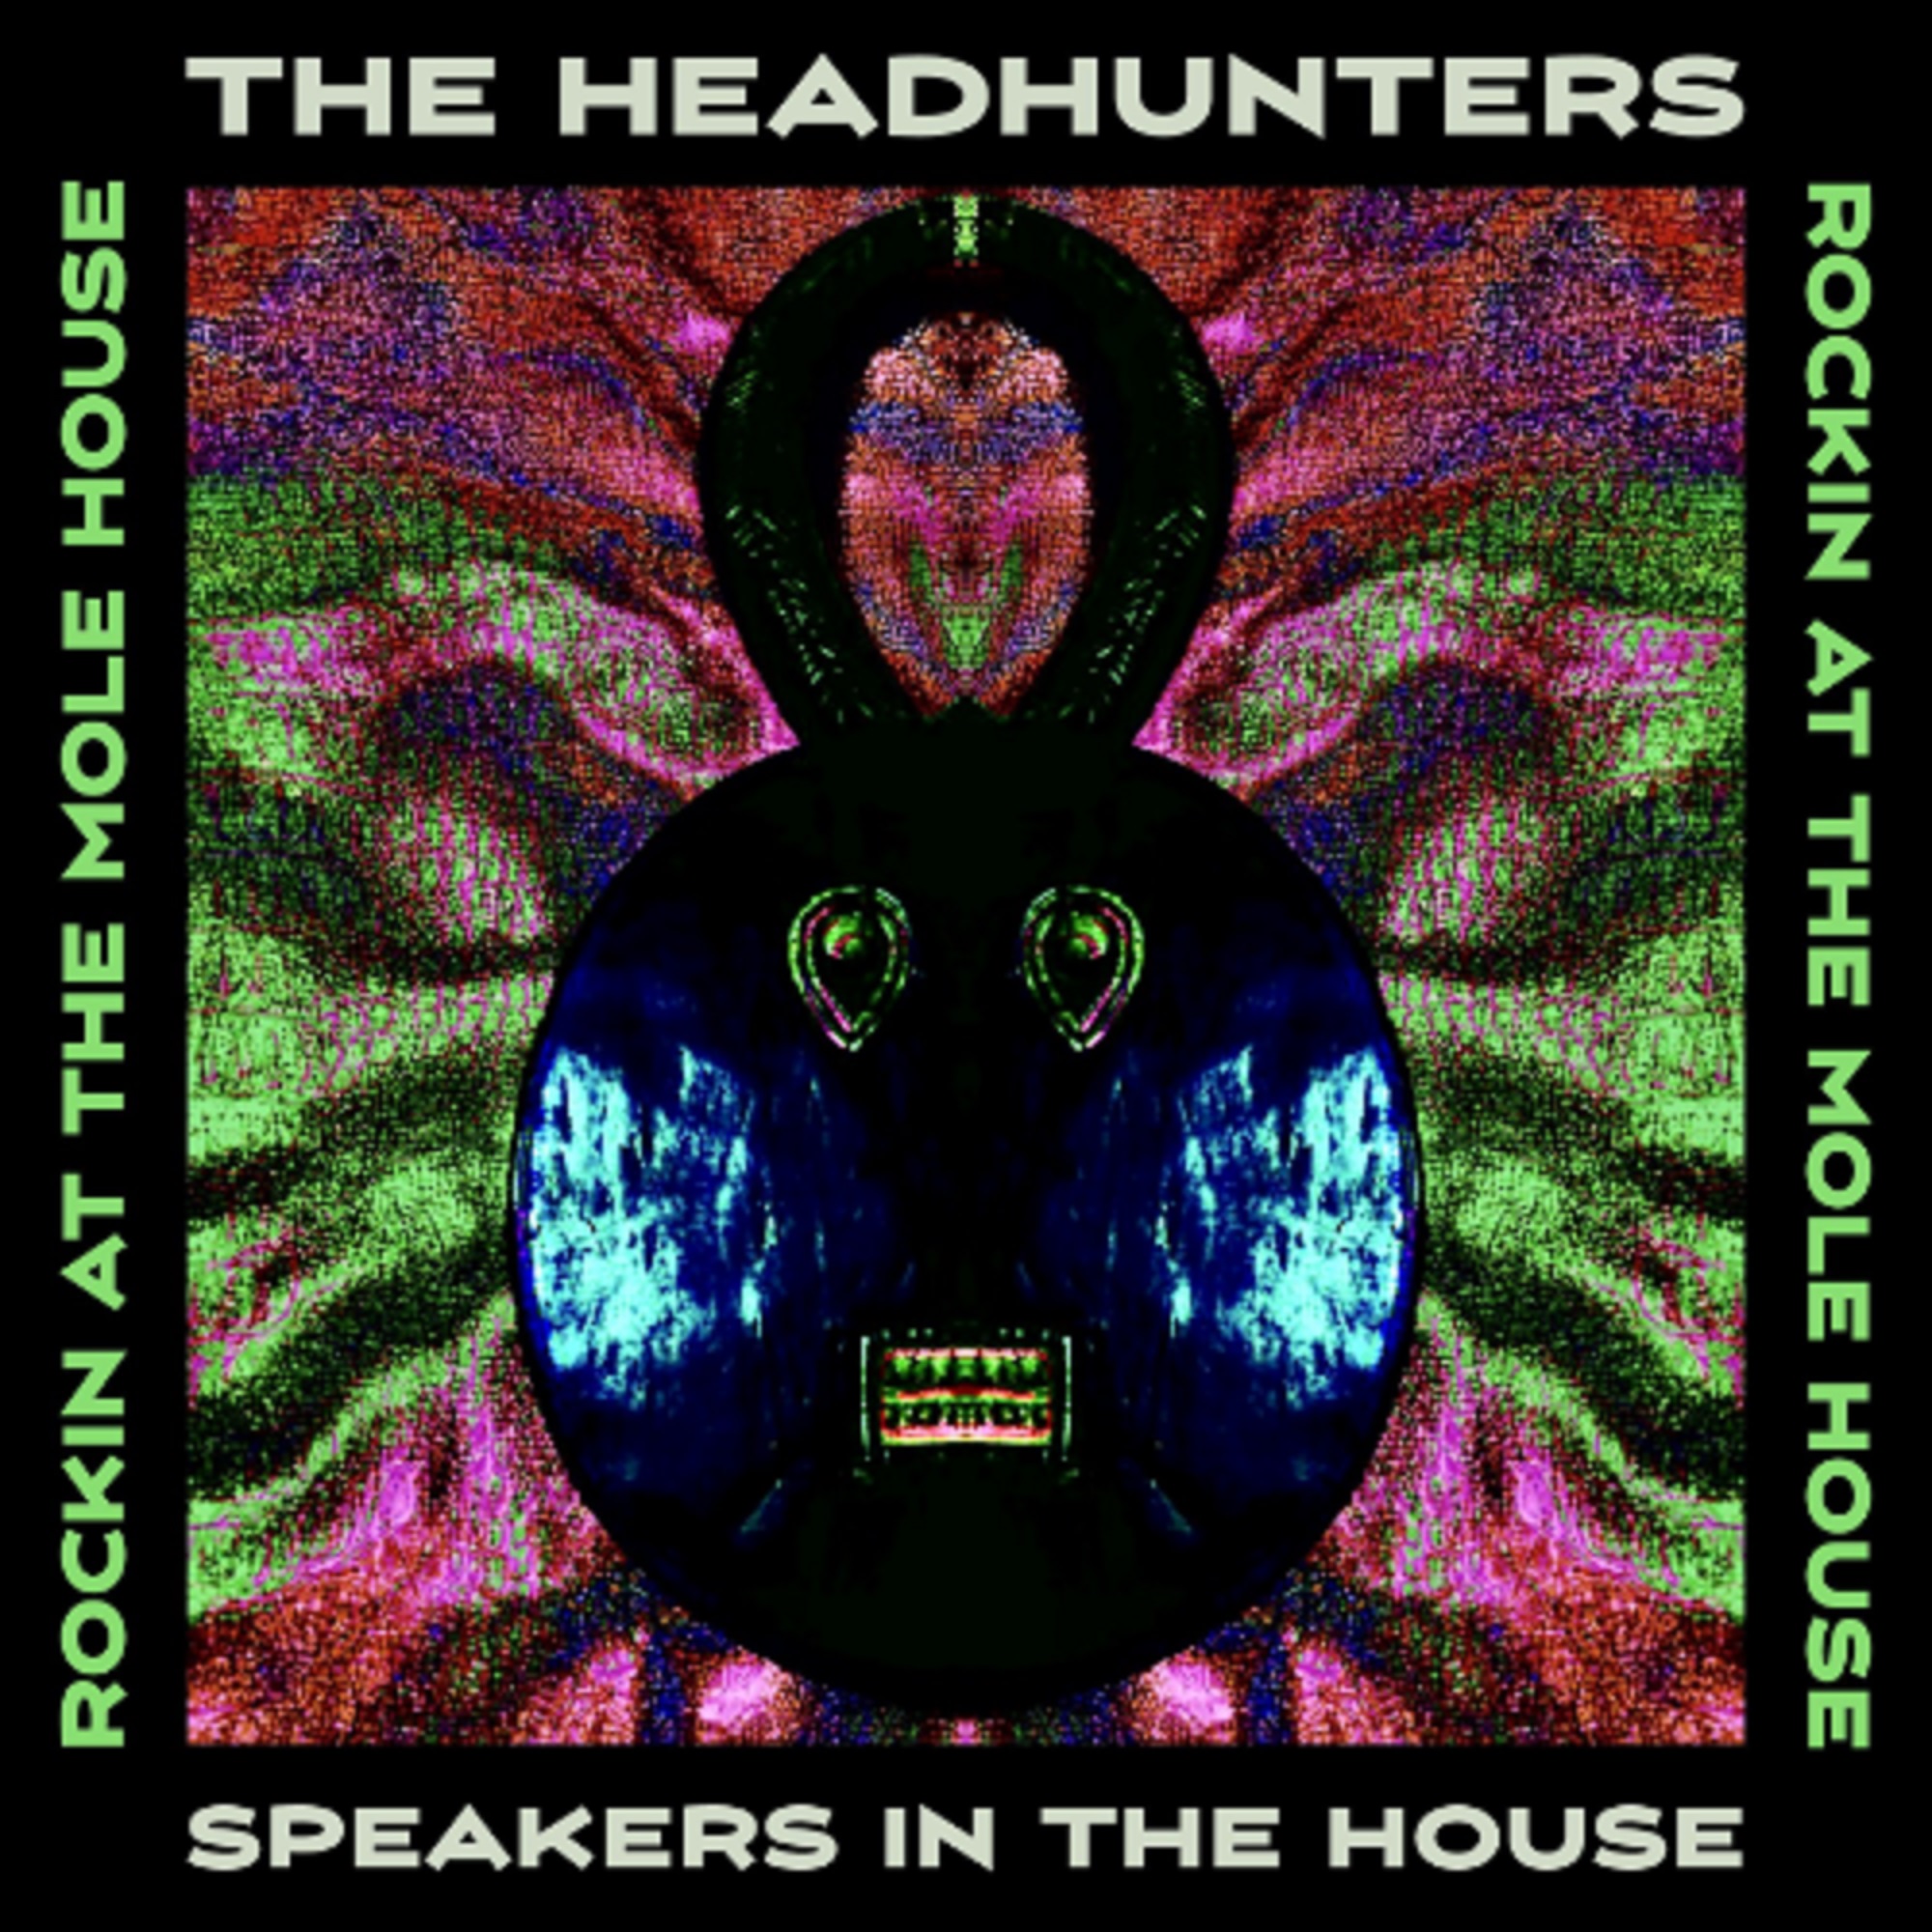 The Headhunters To Release New Album 'Speakers In The House' - First Single "Rocking At The Mole House" Out Now